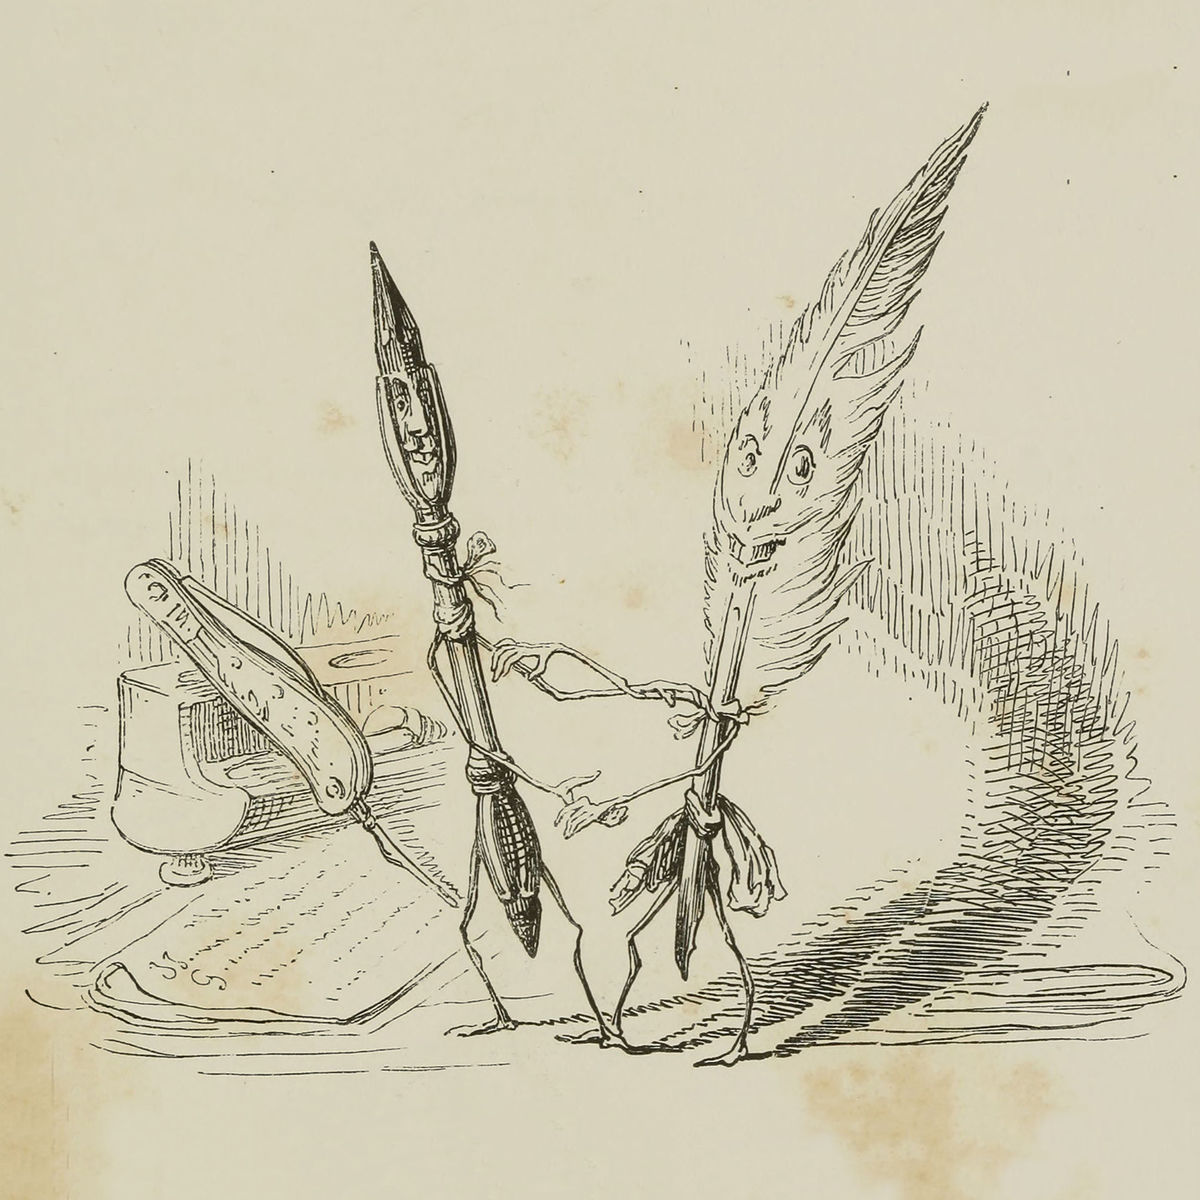 Quill and Pen by J.J. Grandville - 1844